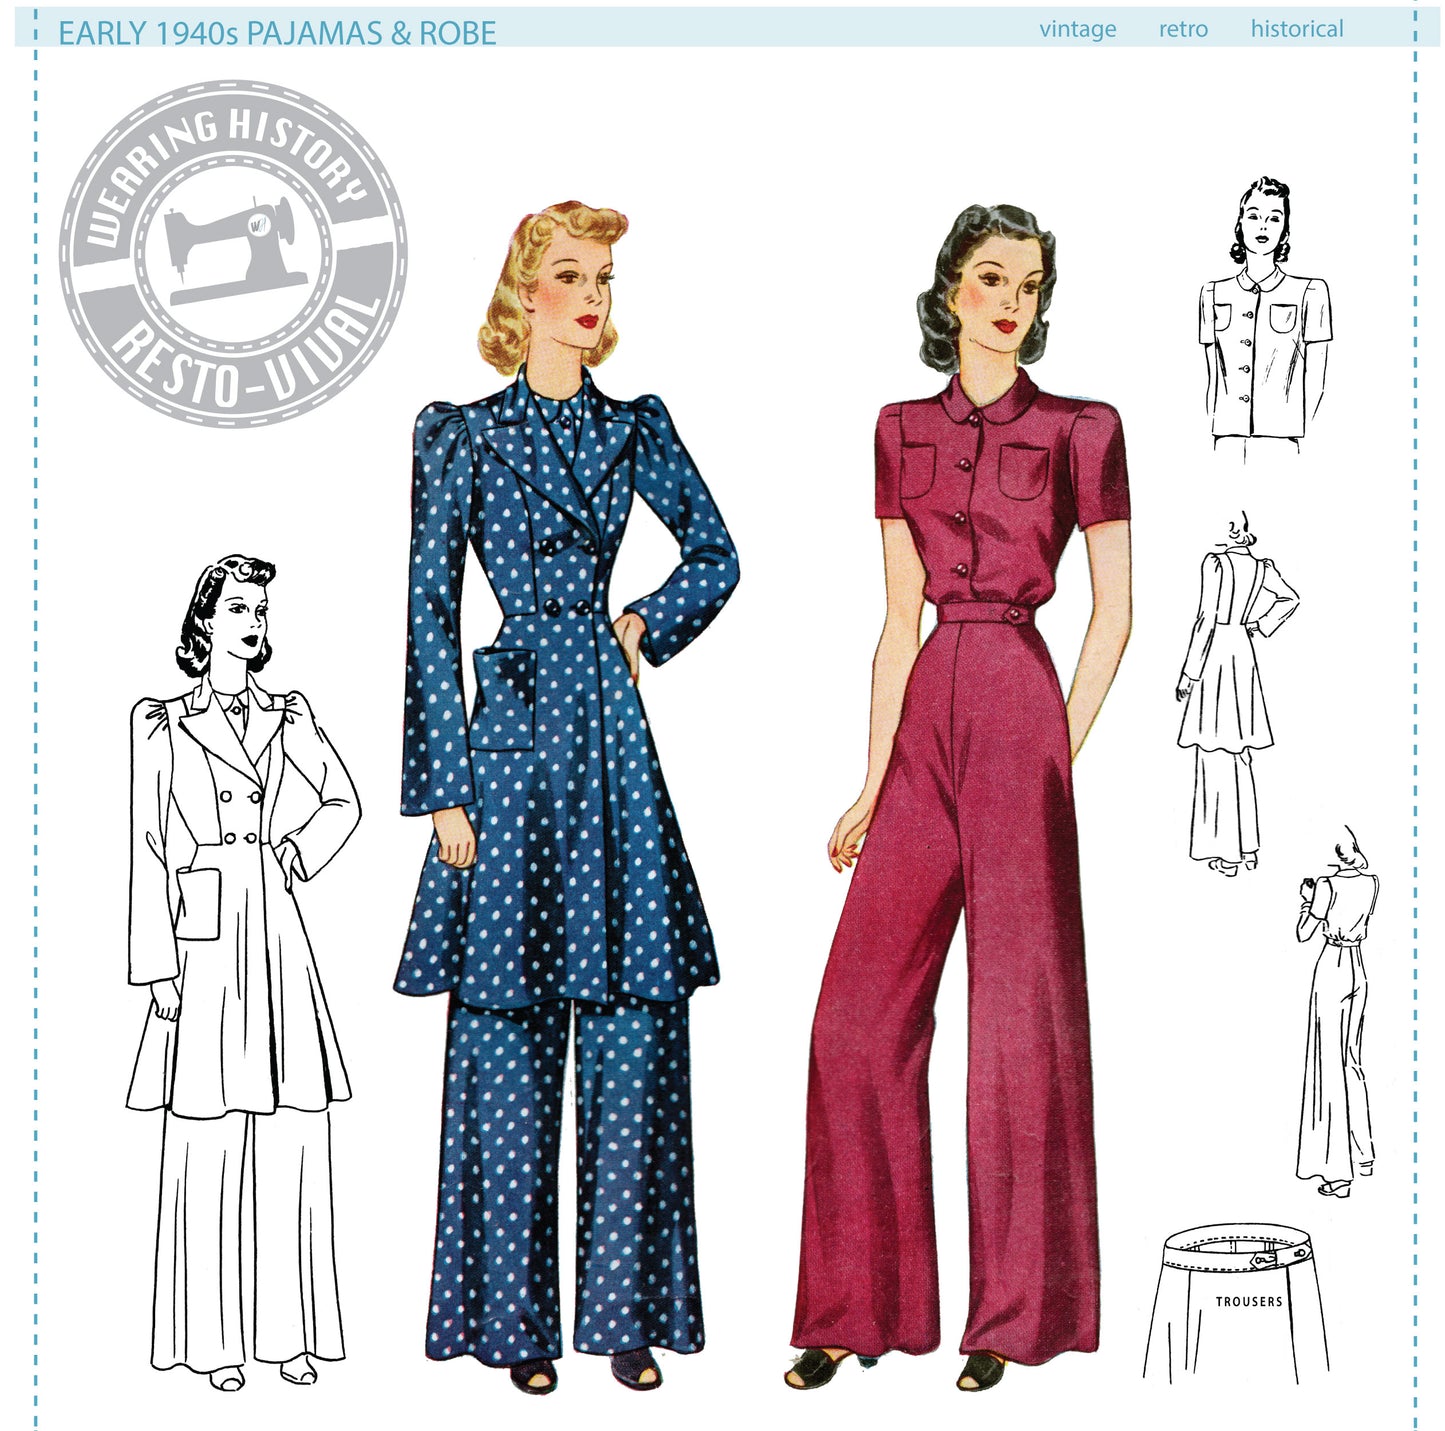 PRINTED PATTERN- Early 1940s Pajamas & Coat Pattern- Sizes 30-44" Bust